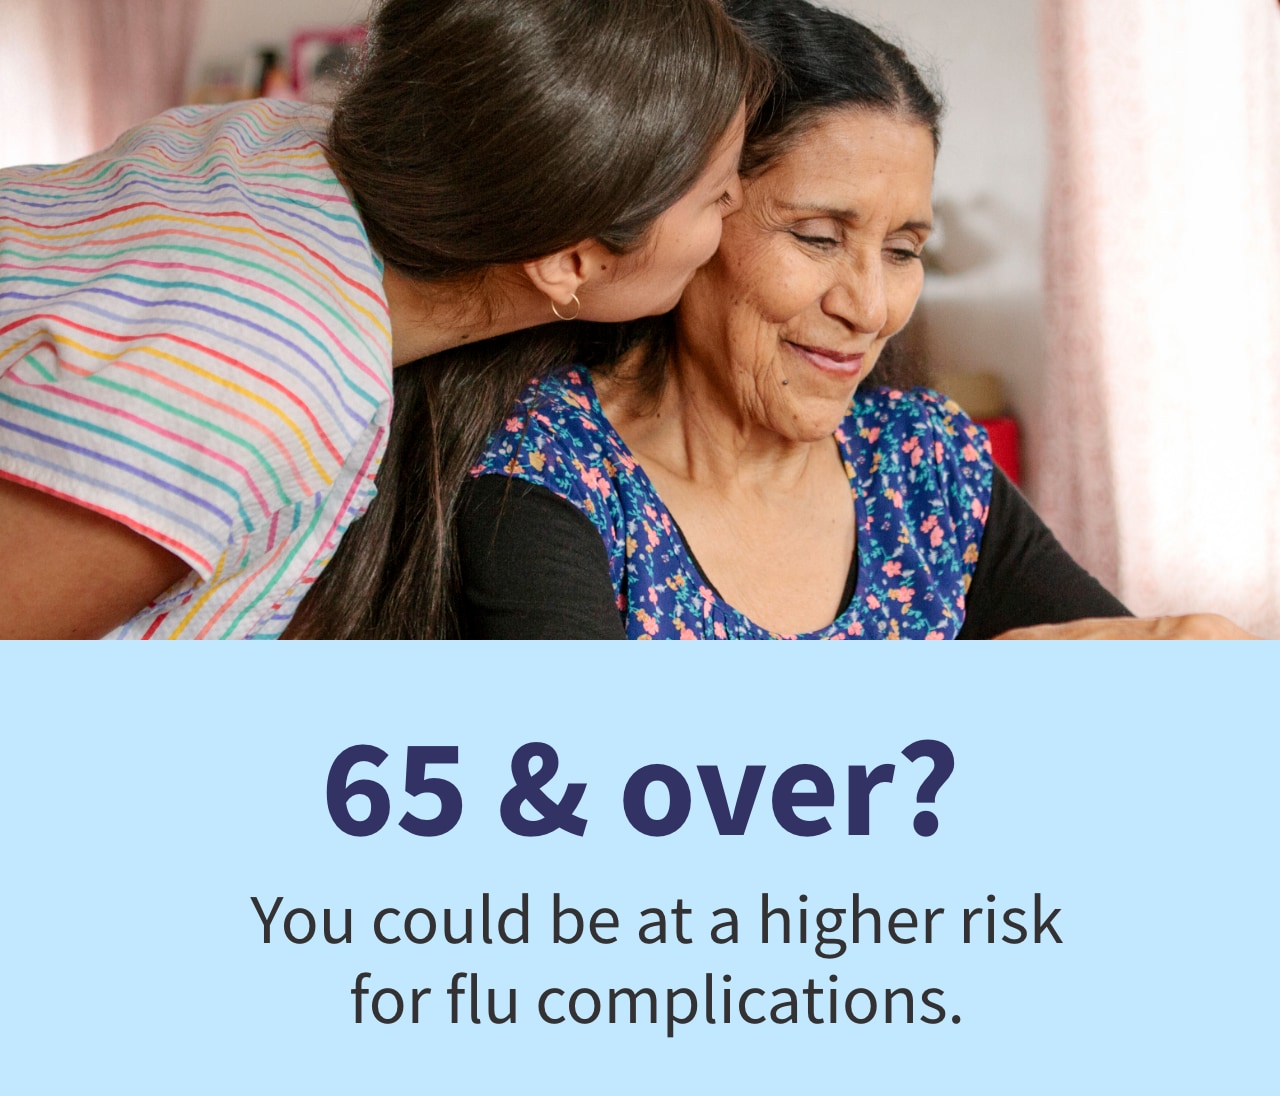  65 over? You could be at a higher risk for flu complications. 